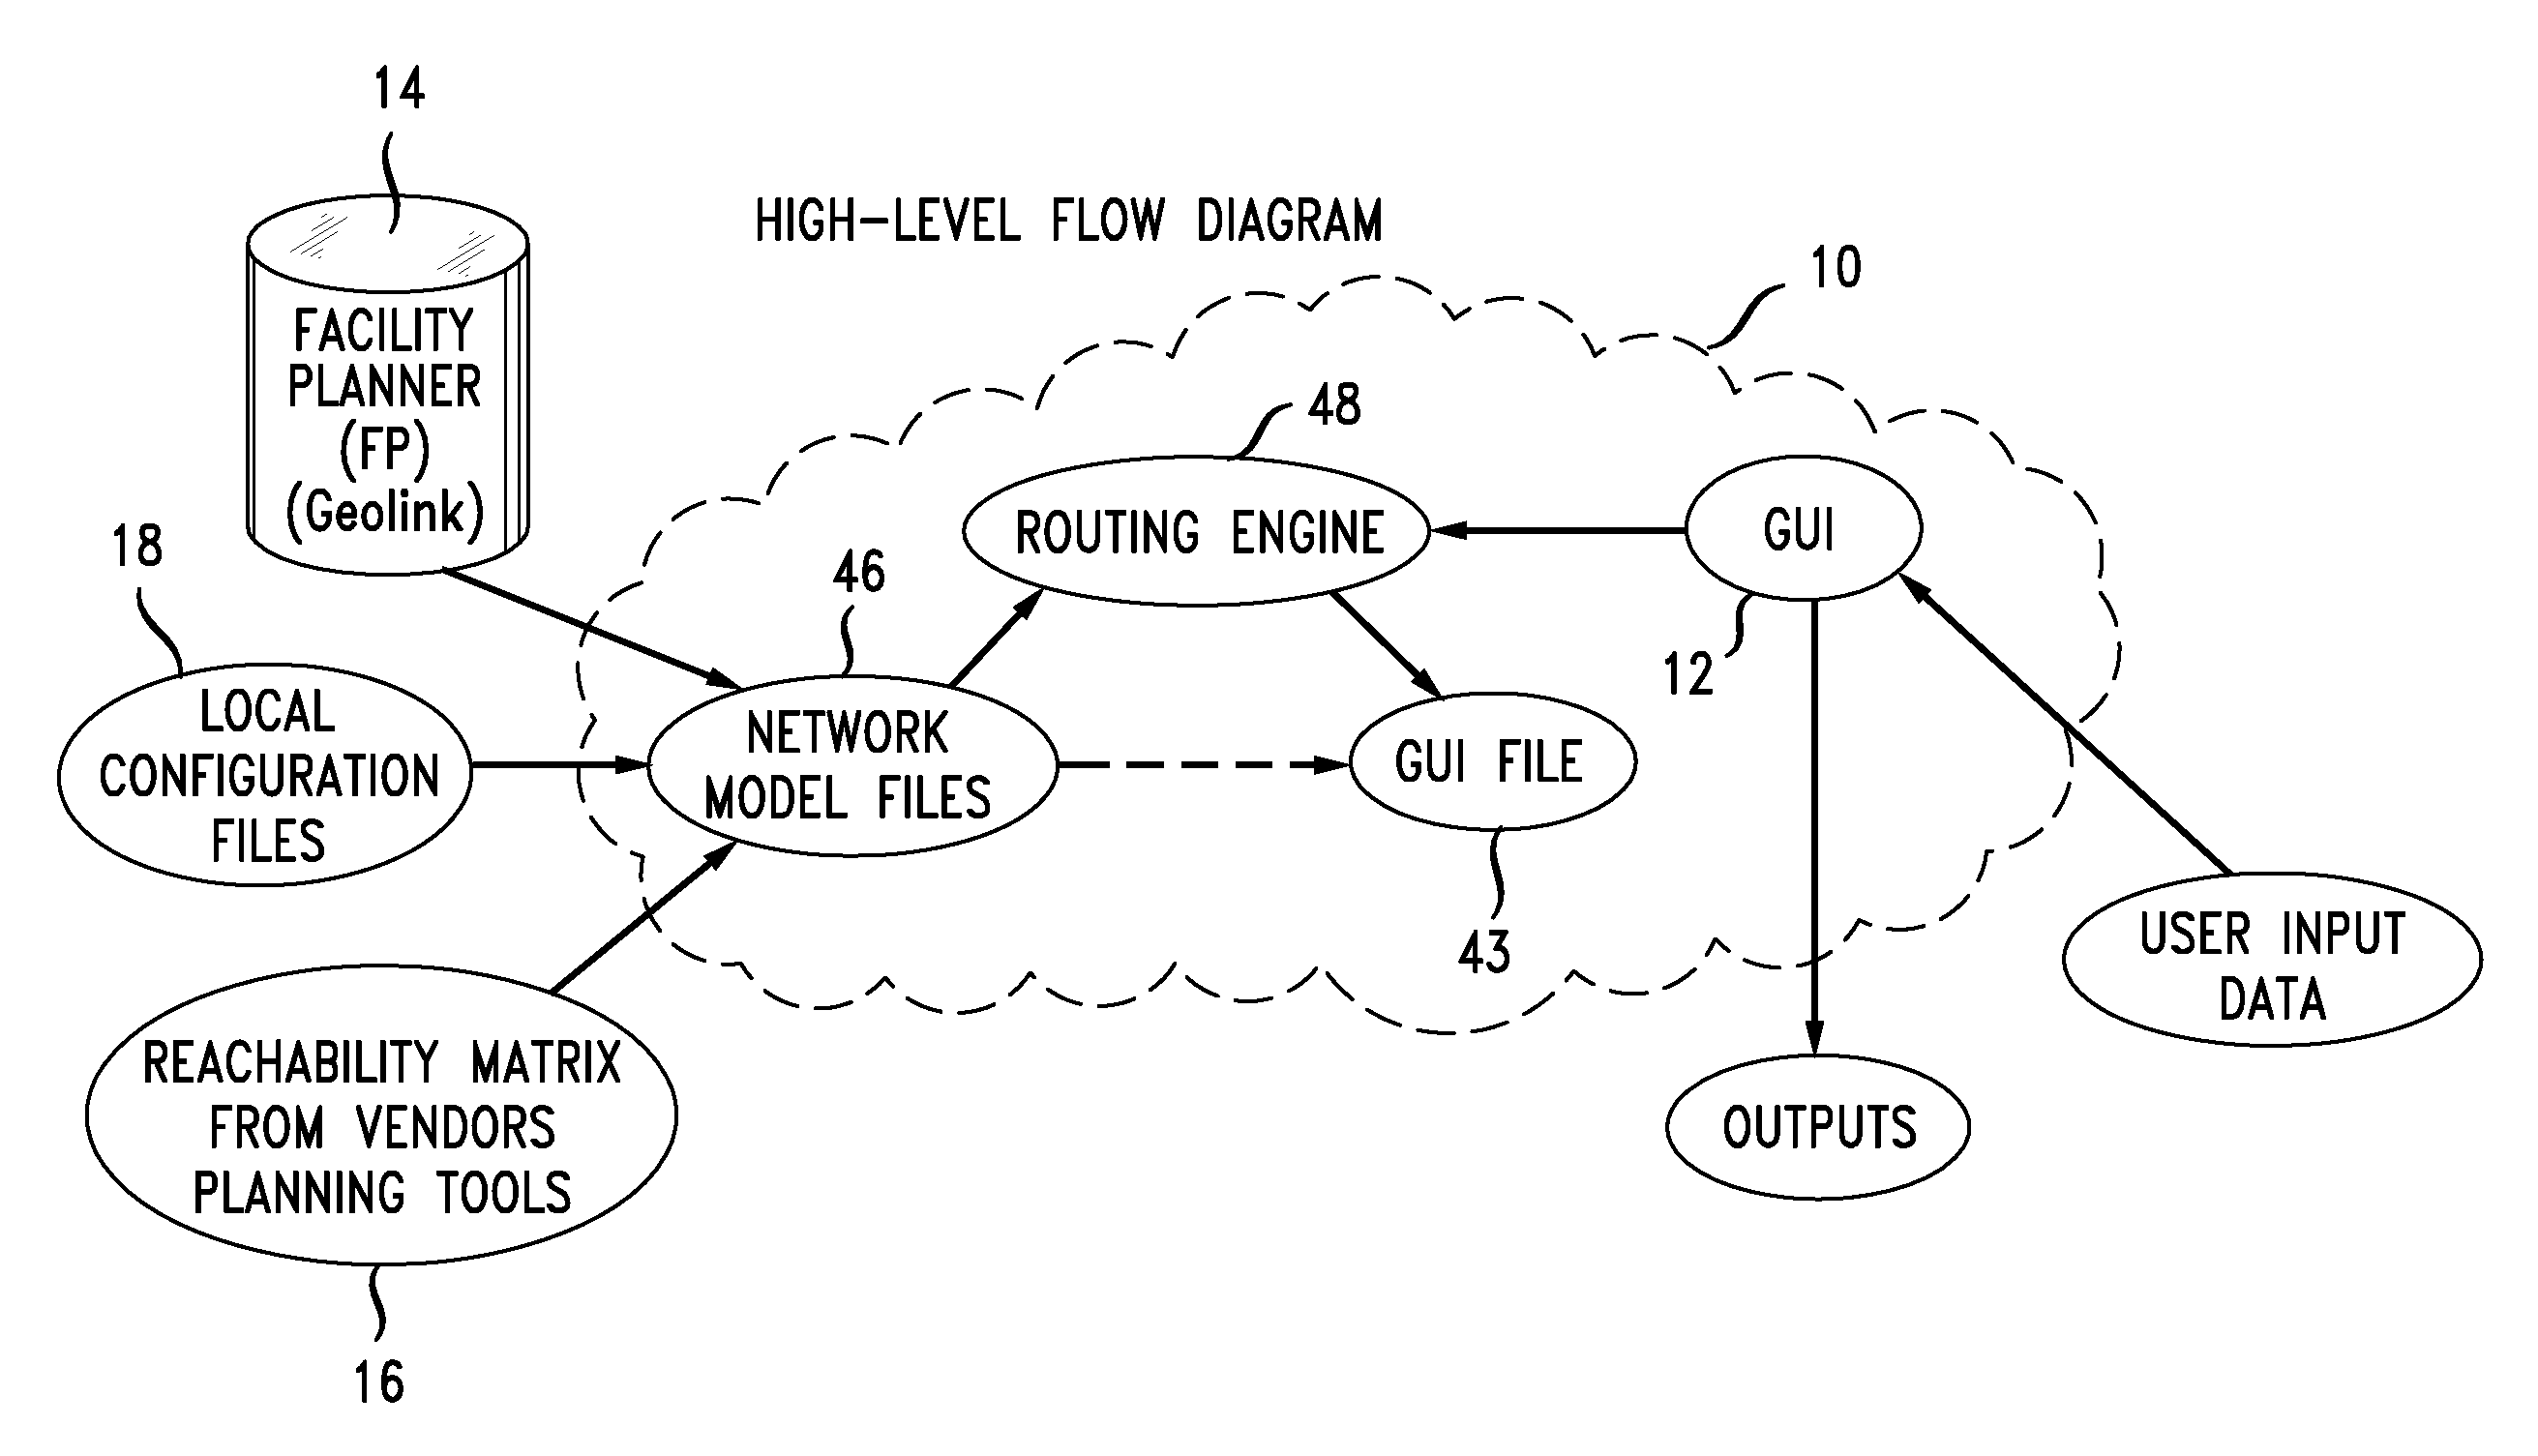 Reachability matrices spanning multiple domains in an optical network